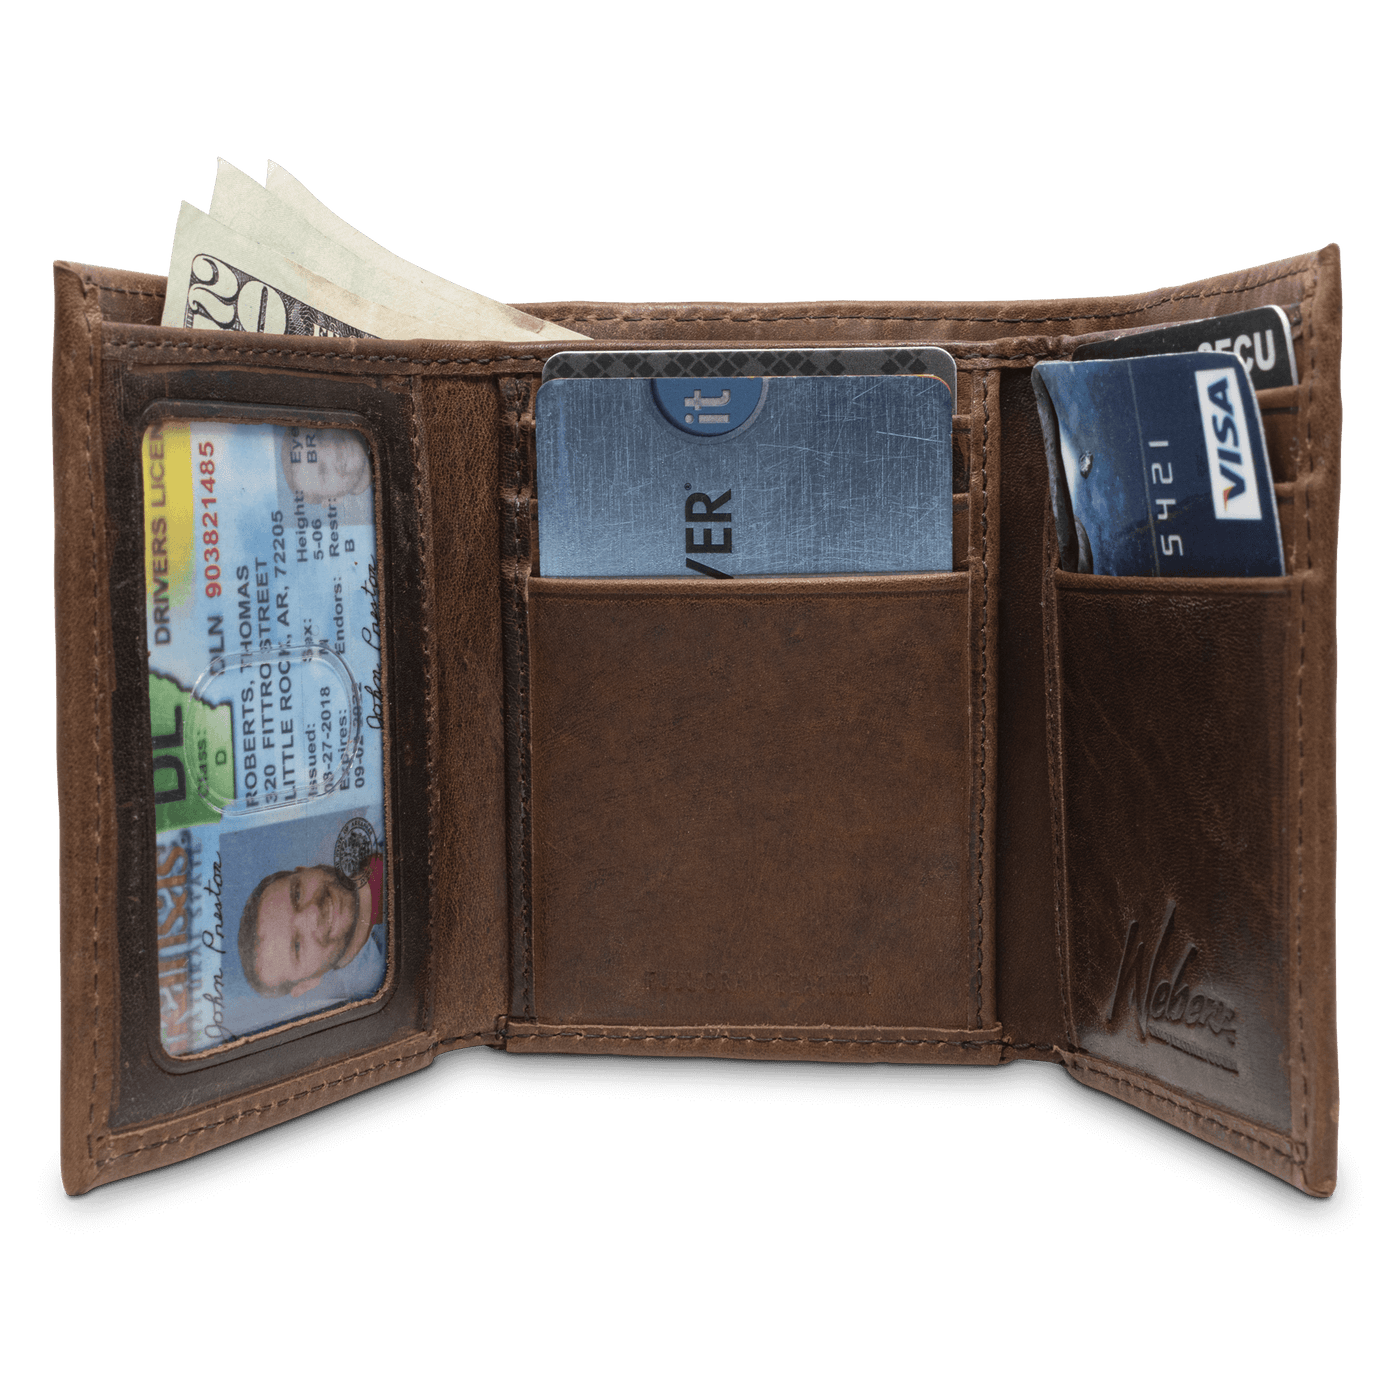 Our signature Dynasty Trifold Elk Wallet comes in premier full grain leather along with a hand-oiled stylish finish. A stunning piece to have in your collection! 6 Card Slots 2 Storage Pockets ID Window Leather Tipped Bill Compartment Weber’s Signature Elk Concho Dimensions: 3.37"L x 4"H RFID Protection Color: Brown